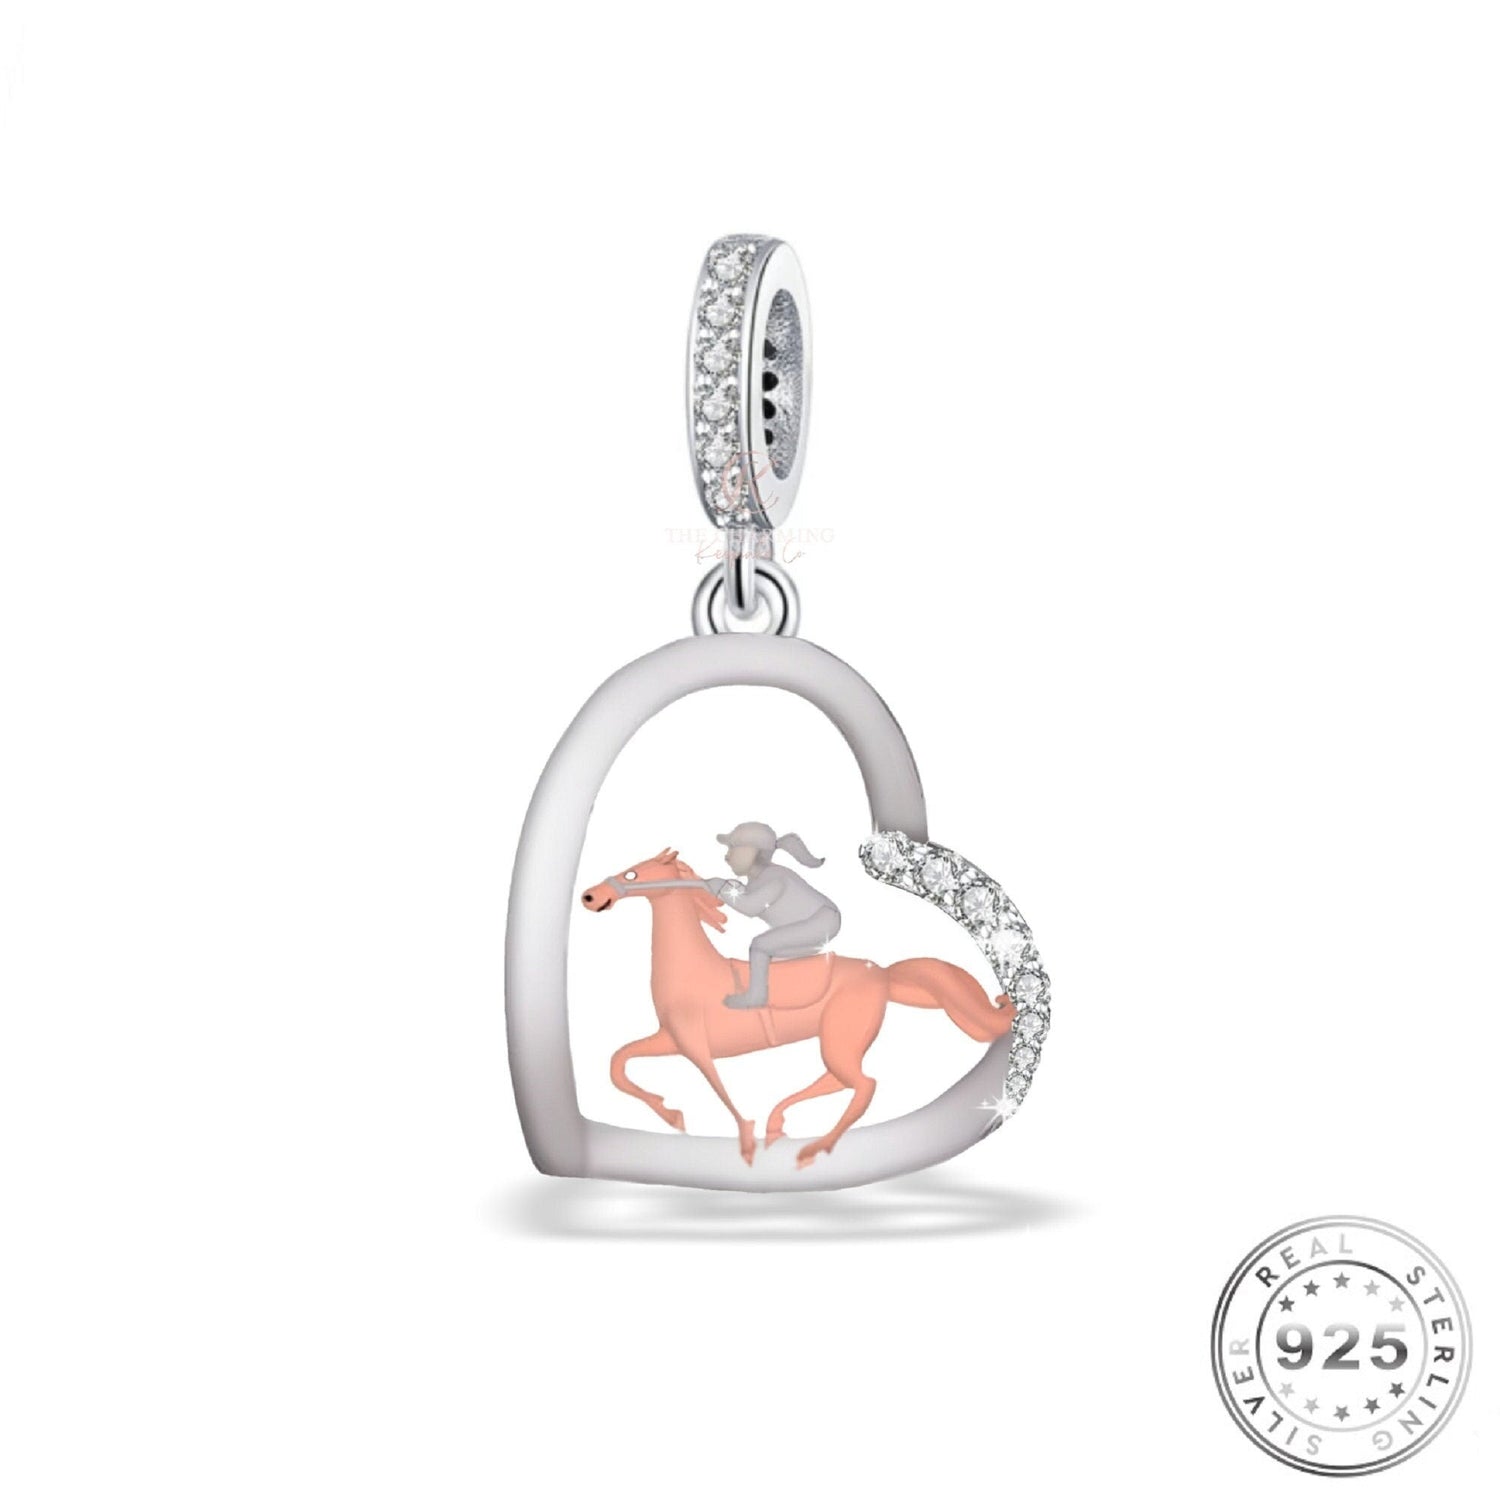 Horse riding Charm 925 Sterling Silver and Rose Gold fits pandora bracelets 